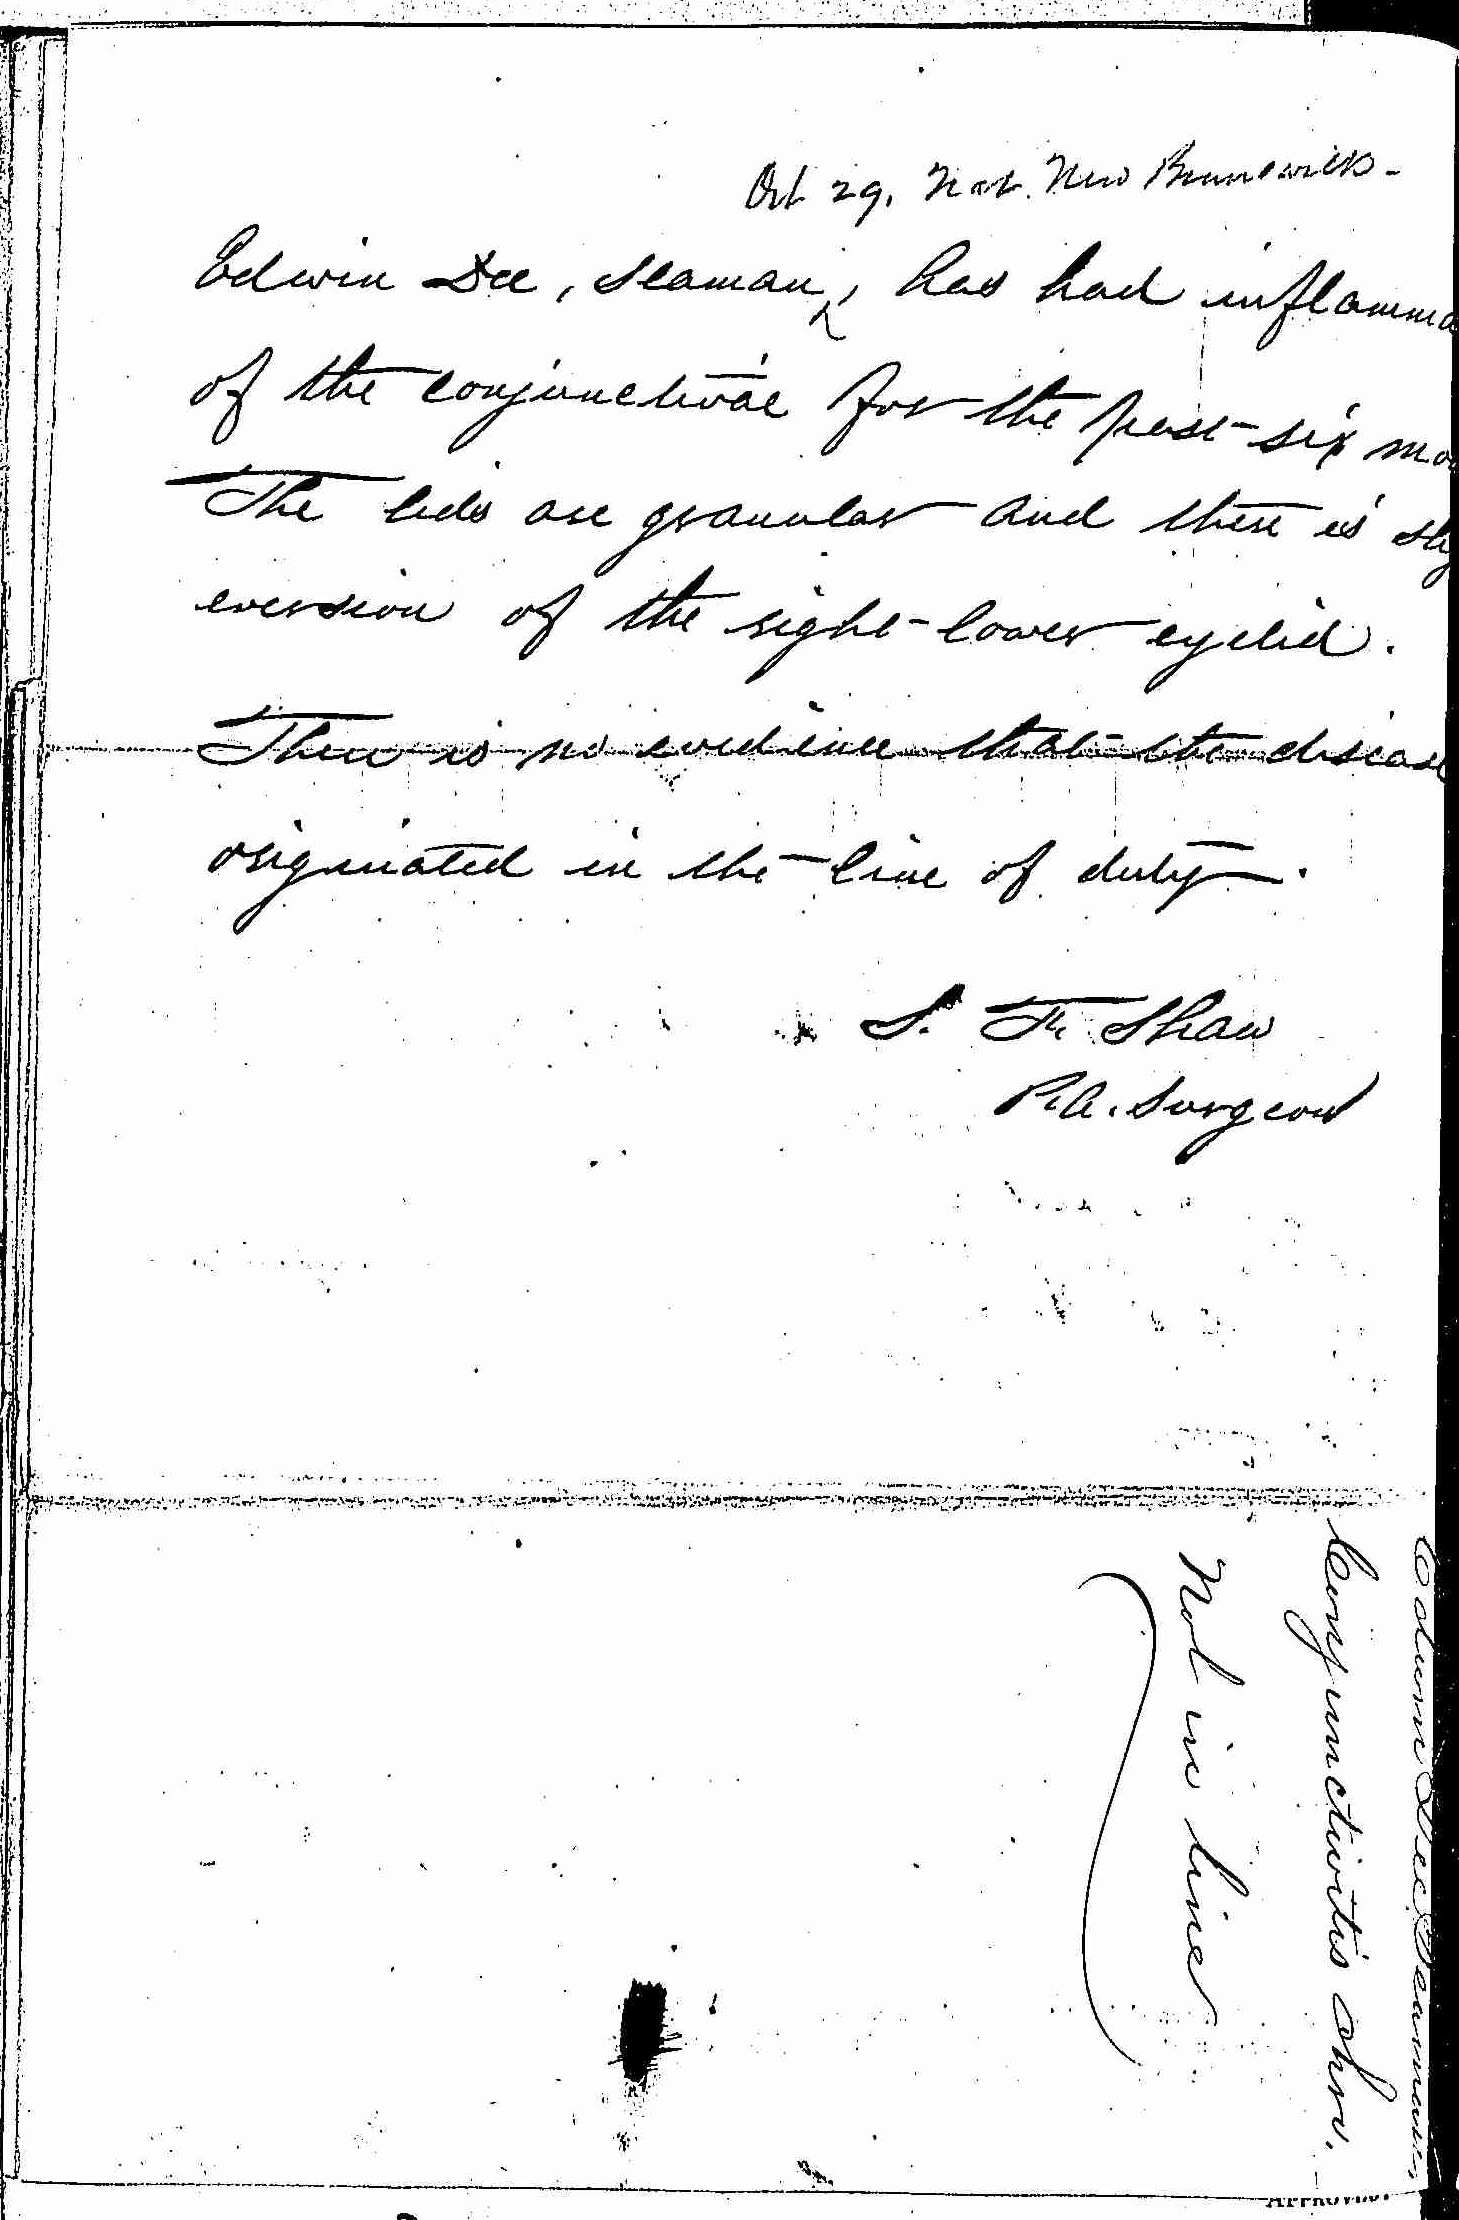 Entry for Edwin Dee (page 2 of 2) in the log Hospital Tickets and Case Papers - Naval Hospital - Washington, D.C. - 1866-68